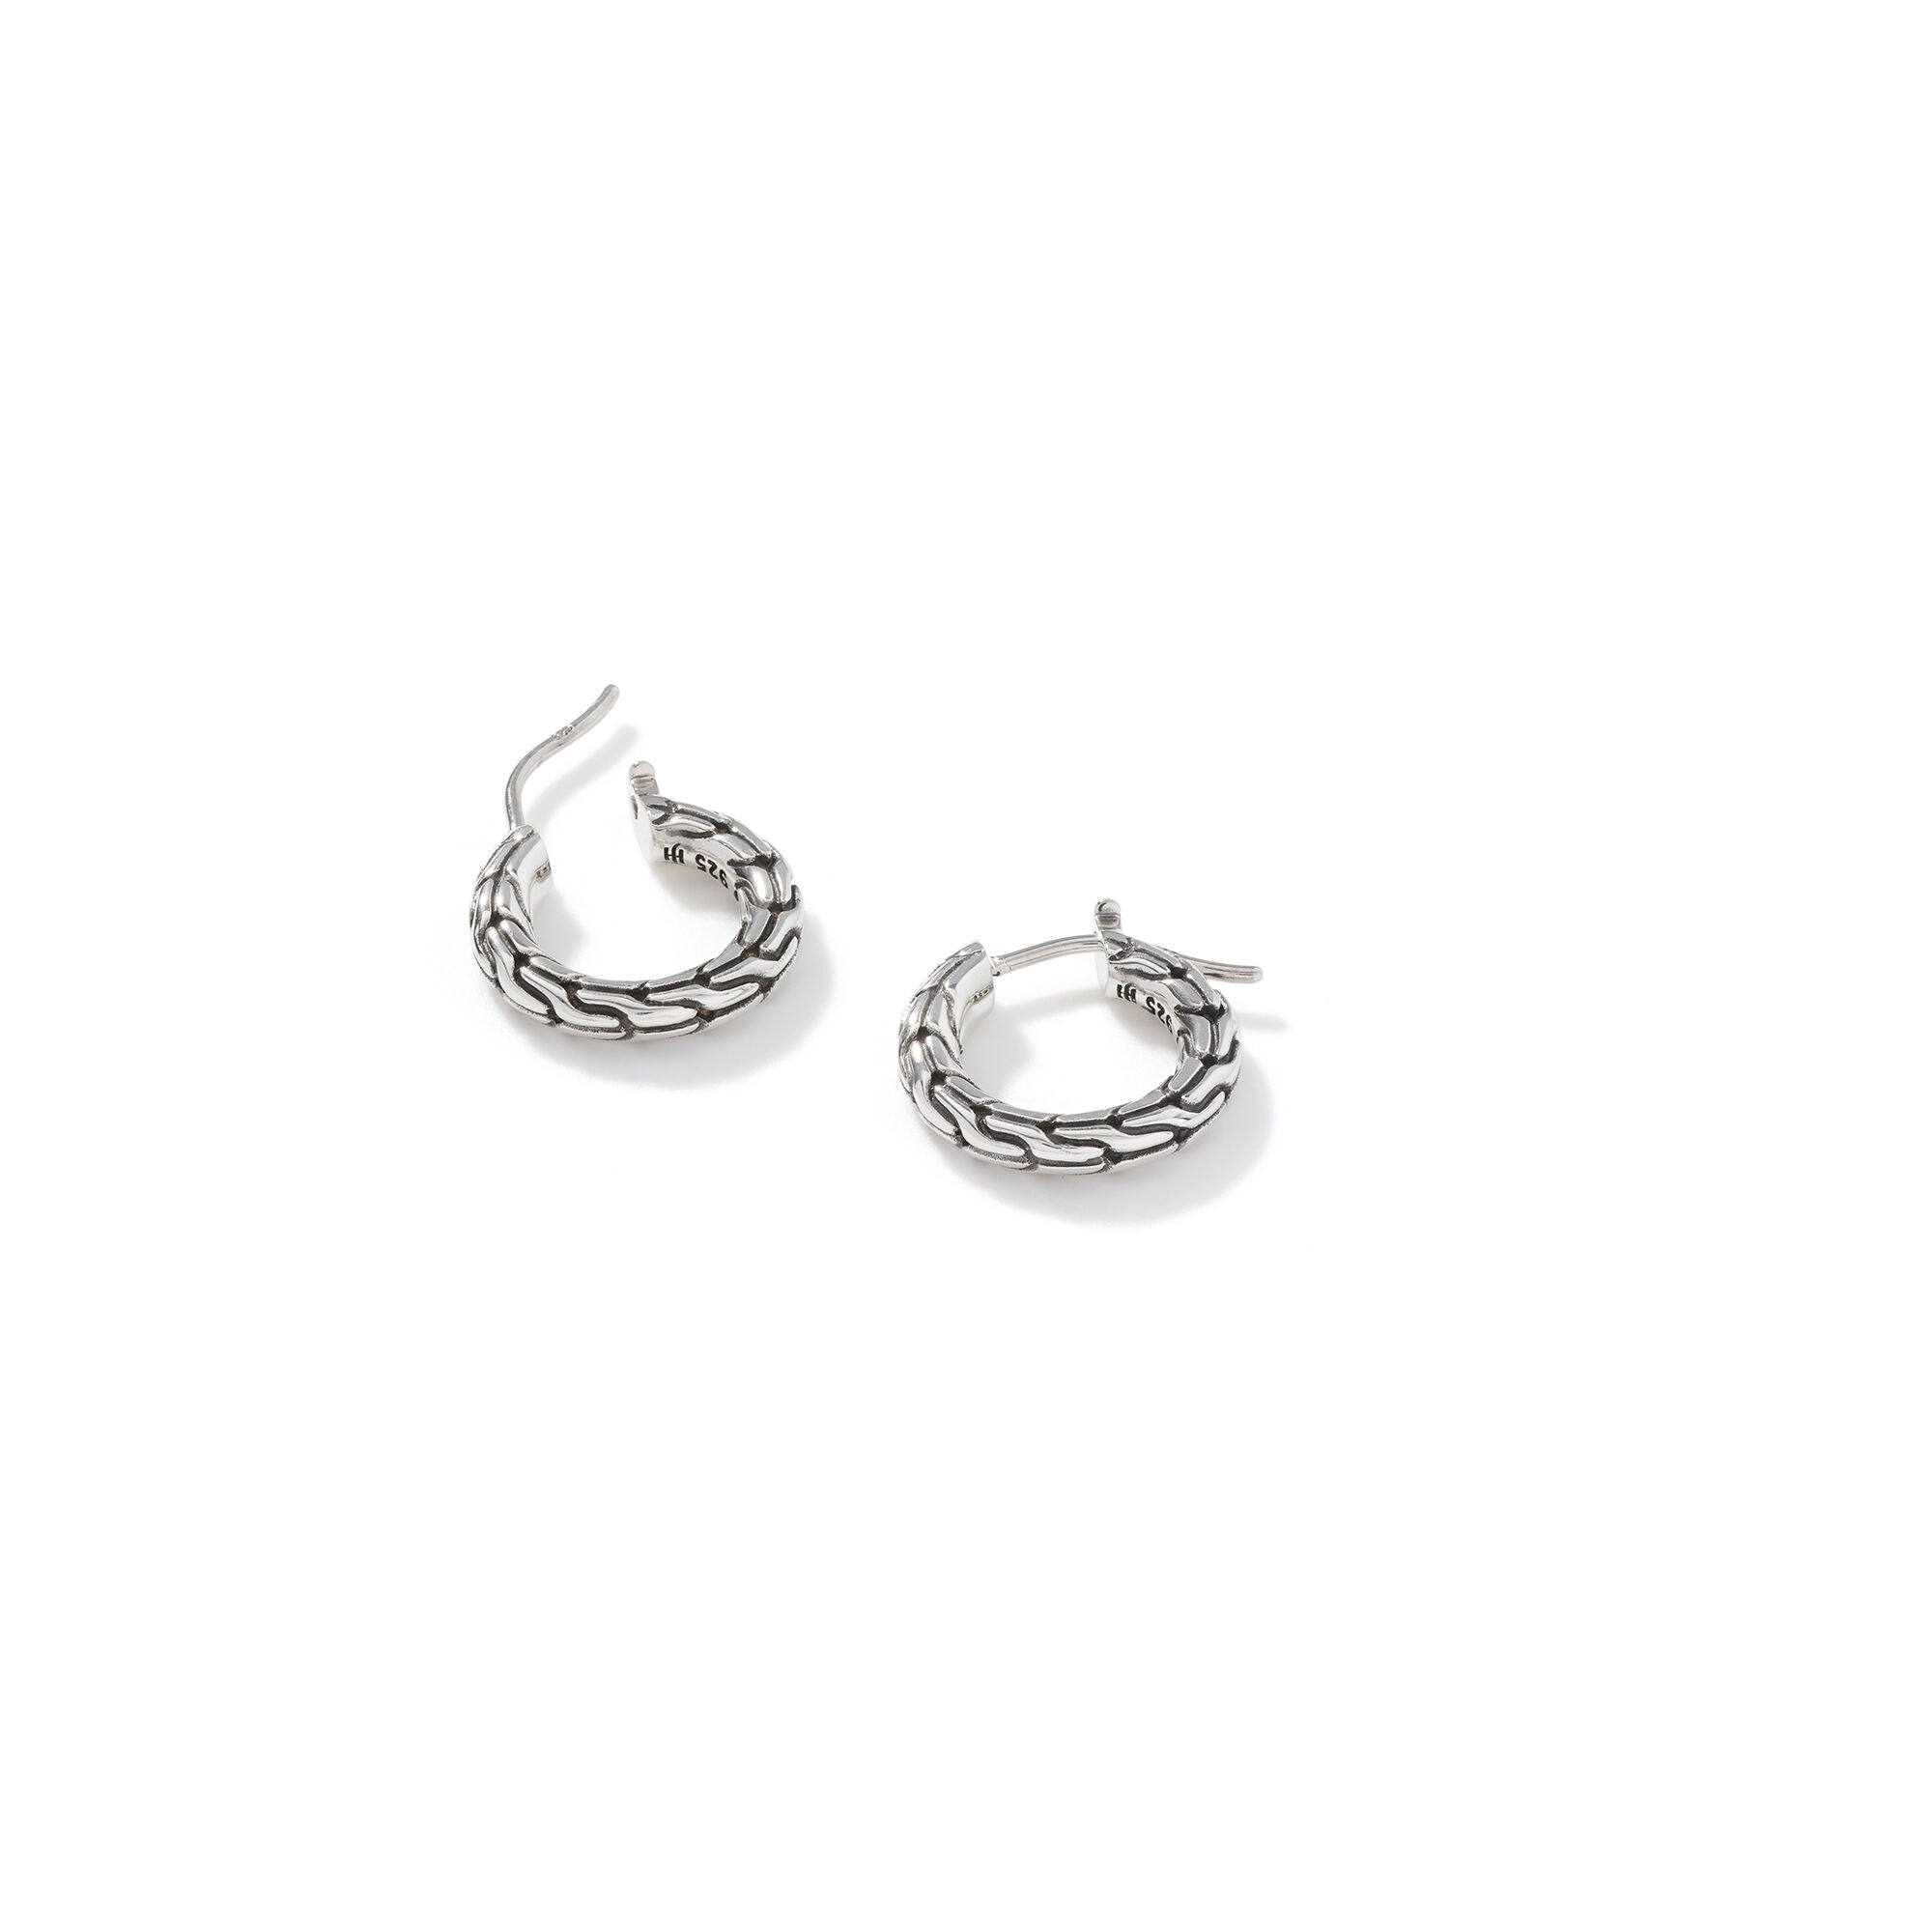 Carved Chain Extra Small Hoop Earrings